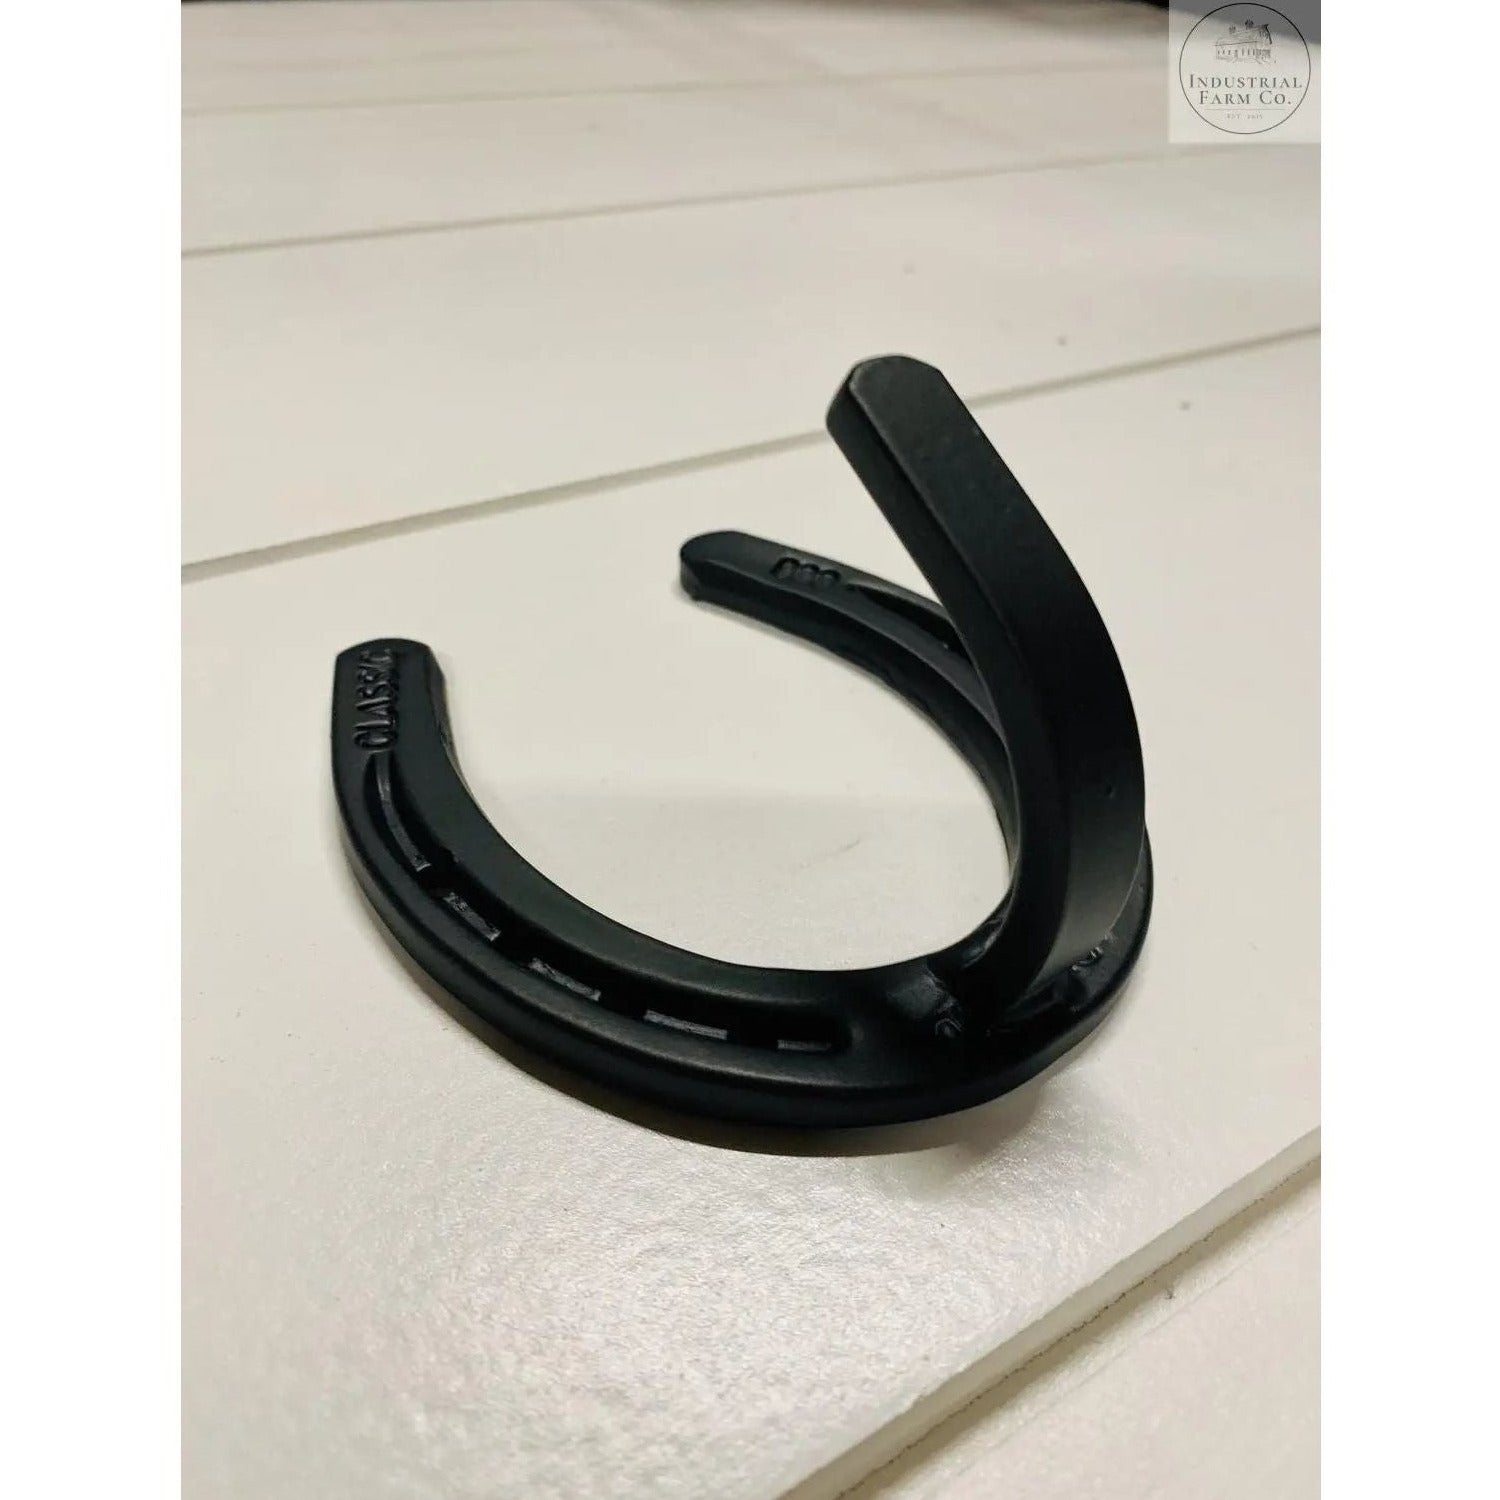 Horse shoe hook for any room